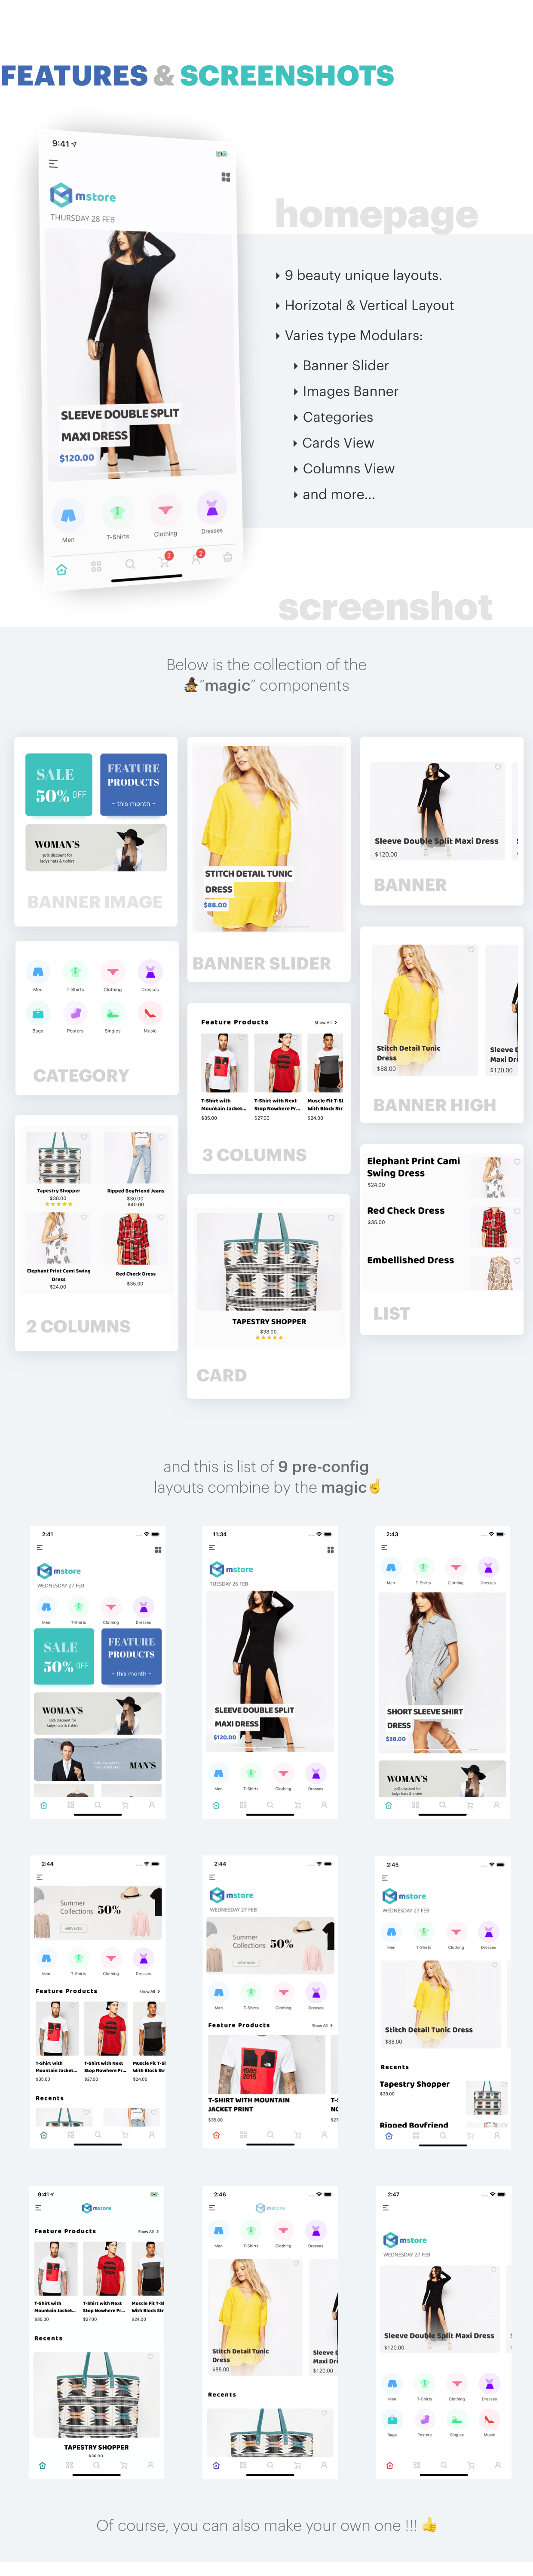 MStore Pro - Complete React Native template for e-commerce - 14